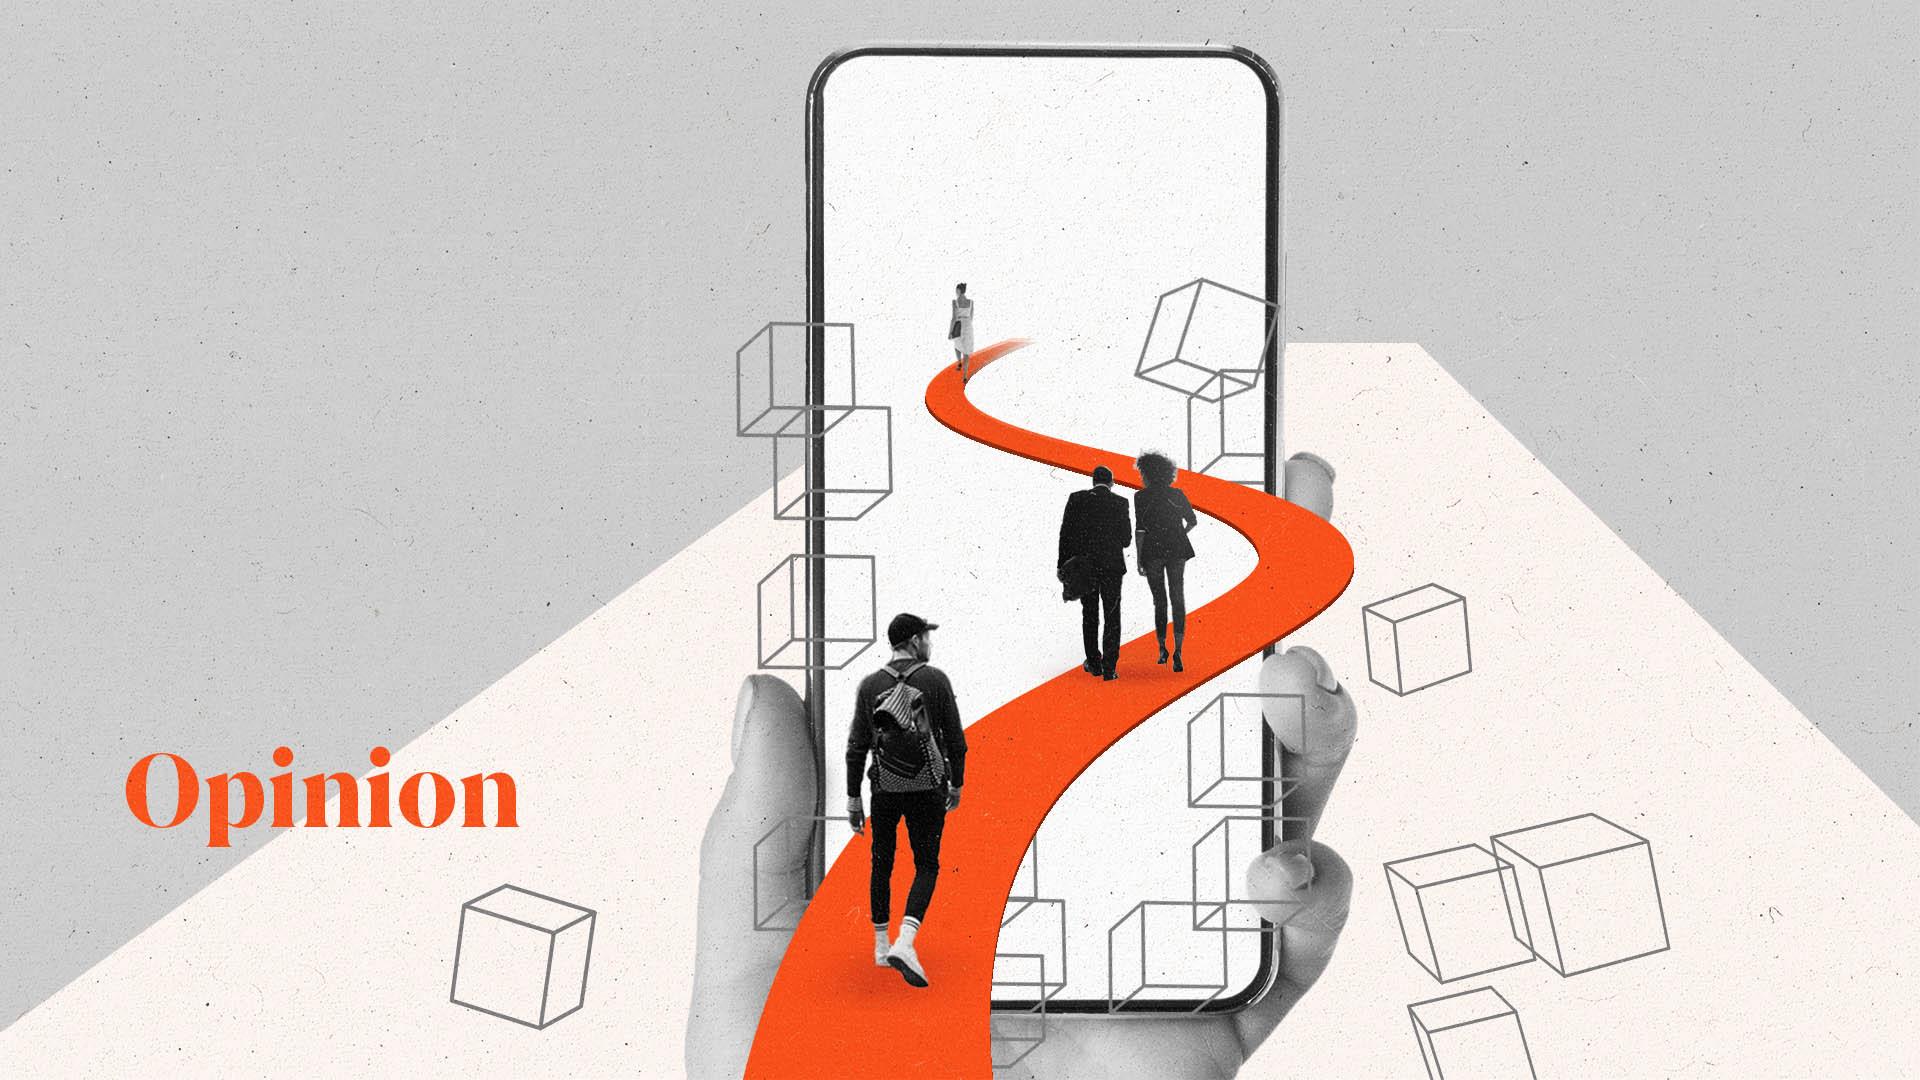 Four people walk along a path into a smartphone as translucent bricks fall away around them.